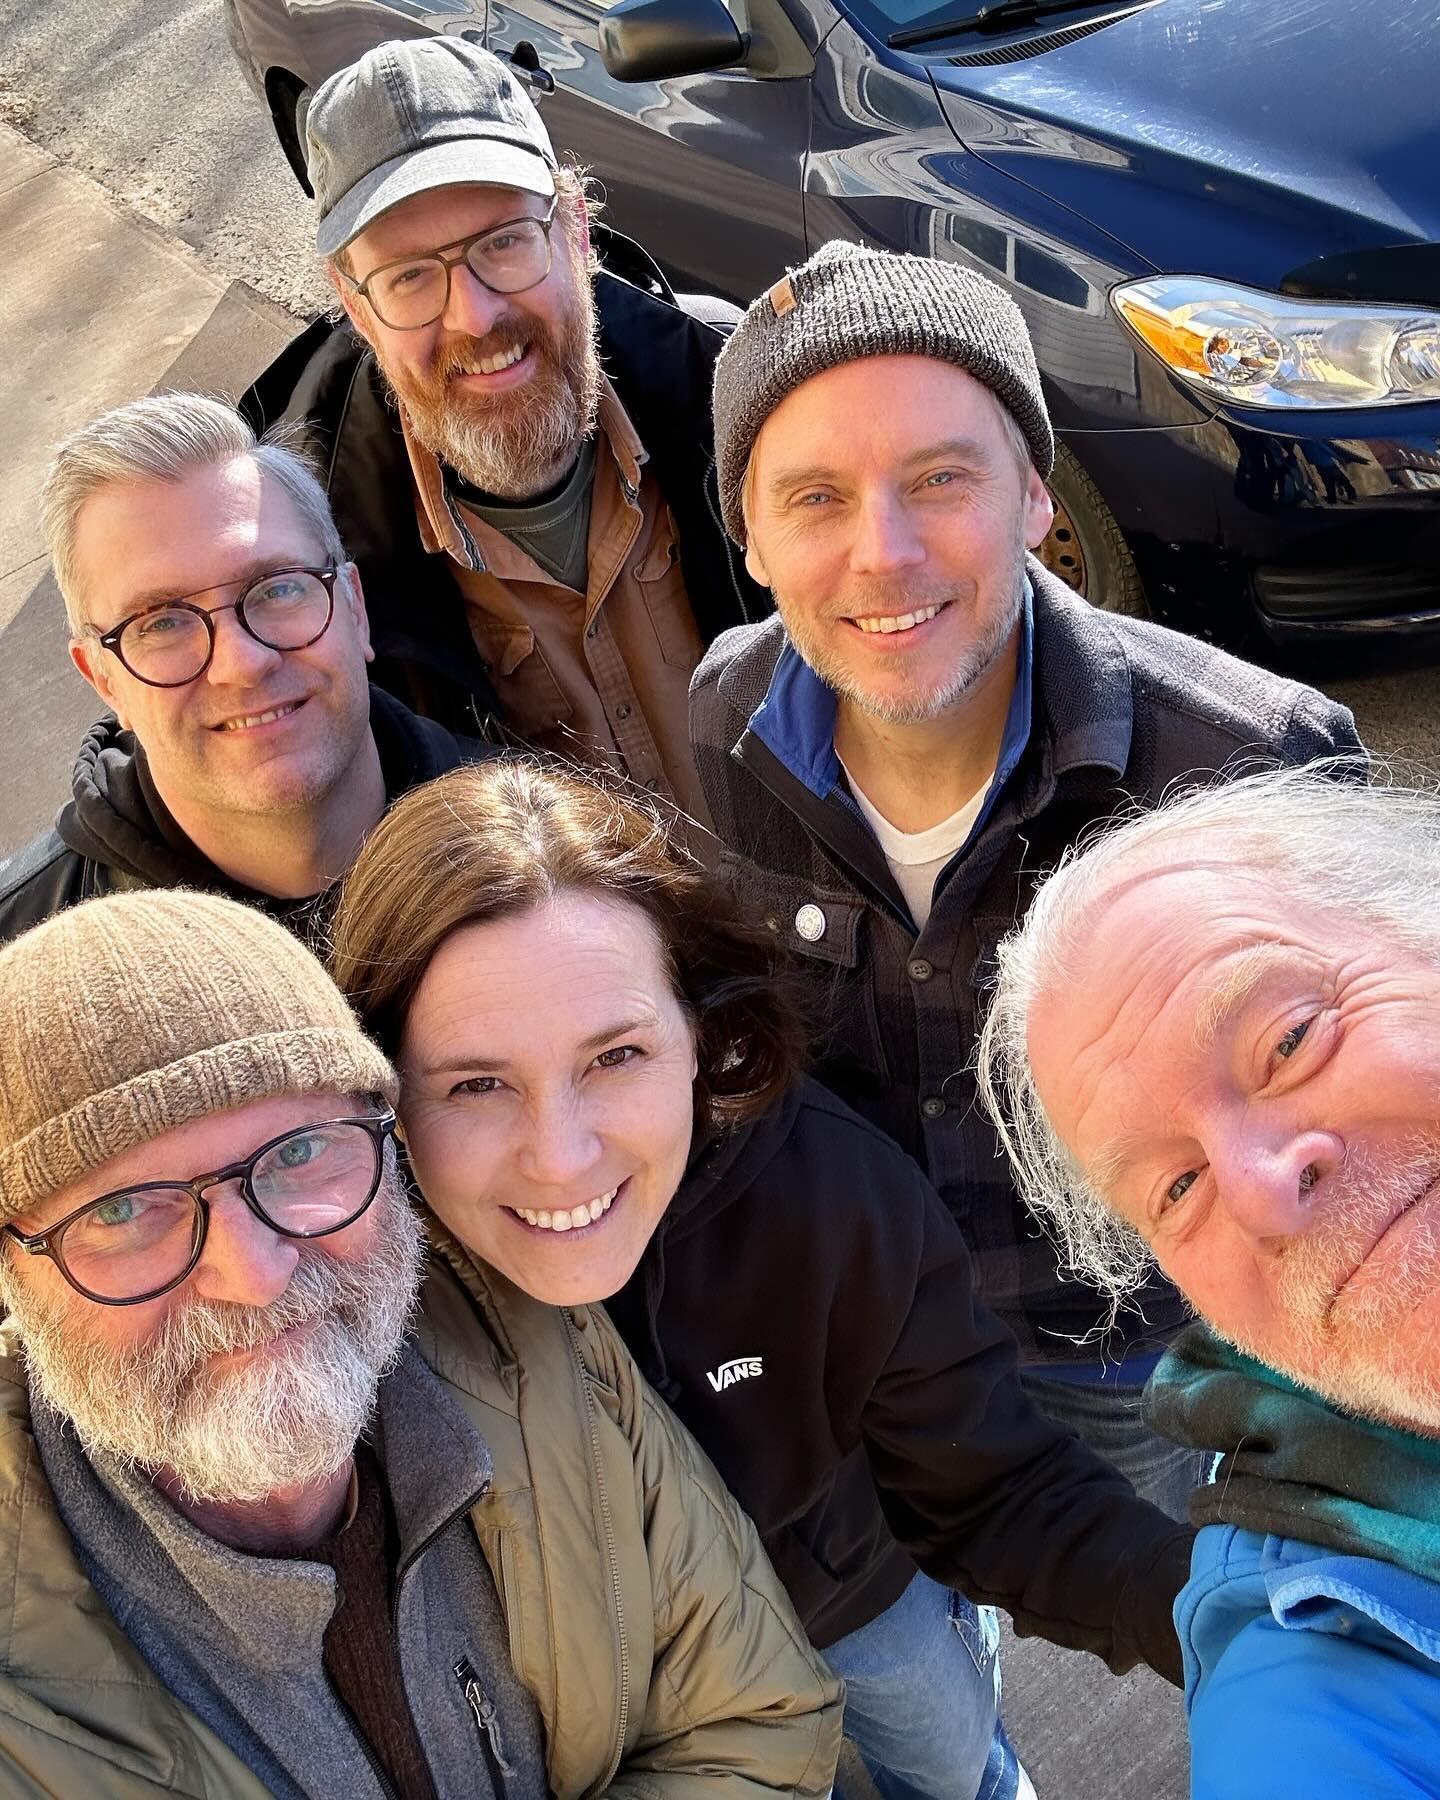 Had a blast recording some new tunes this past weekend with my friends Bill, Sandy, Chris, Jordi and Dale. I can&rsquo;t wait to share what we&rsquo;ve got cooking! Sooooon!😃

@billpreeper @ea_sandy_mackay @ceebray @jordicomstock @dalemurraystudio #